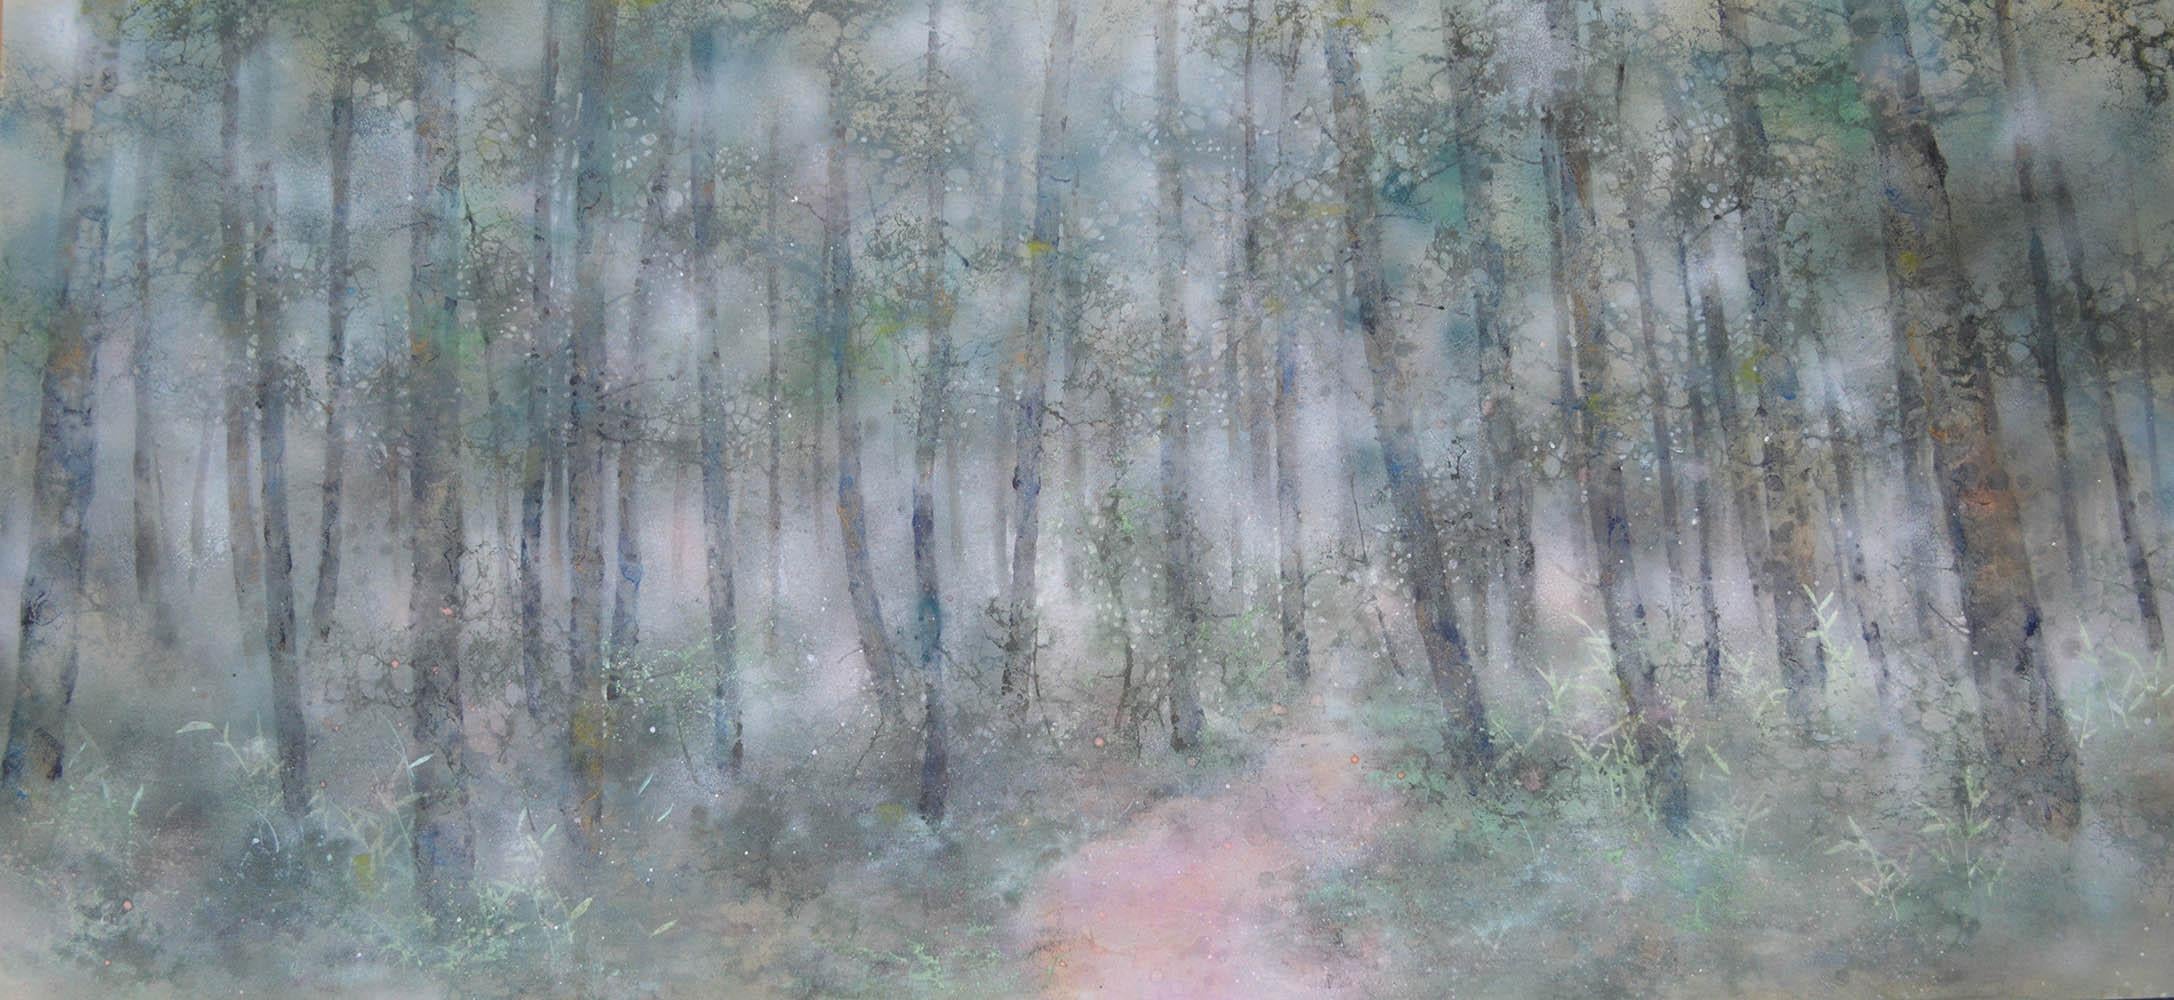 Silva by CHEN Yiching - Contemporary Nihonga painting, forest